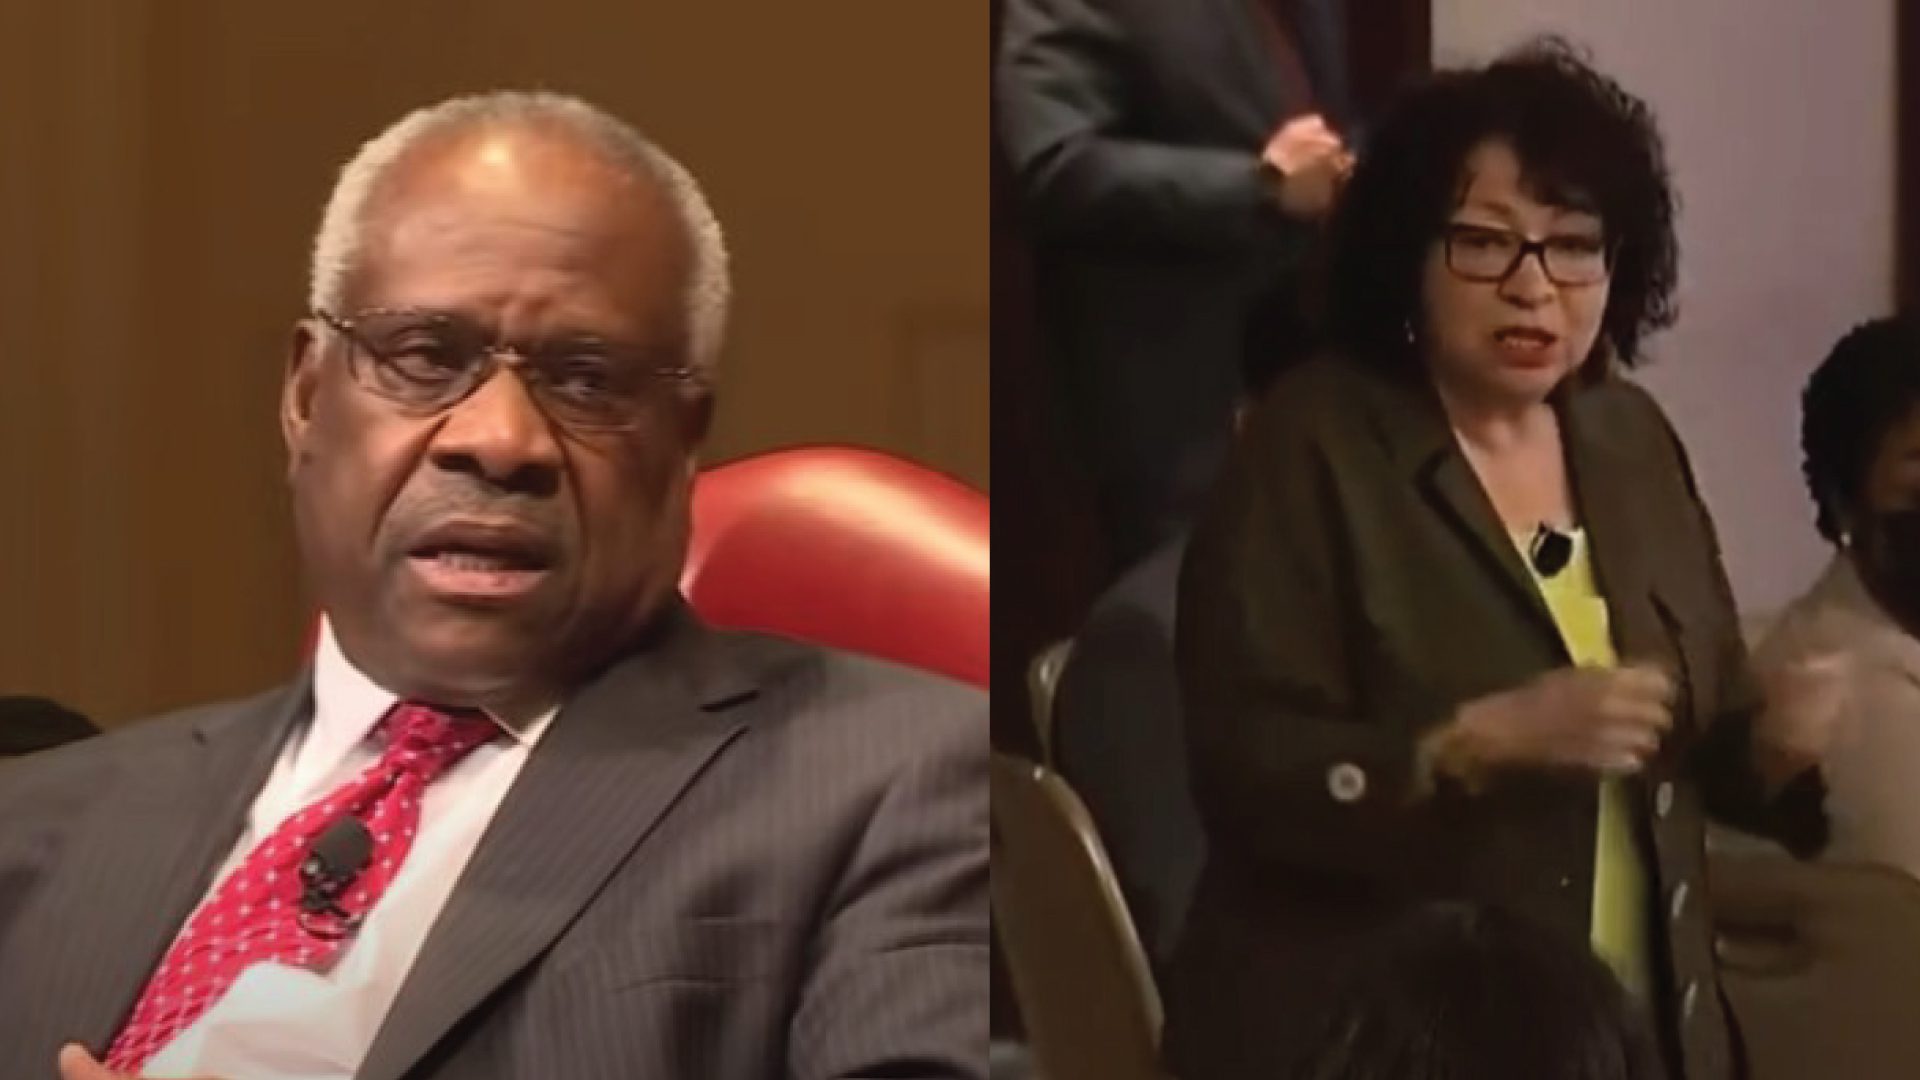 Justice Sotomayor defended Justice Thomas